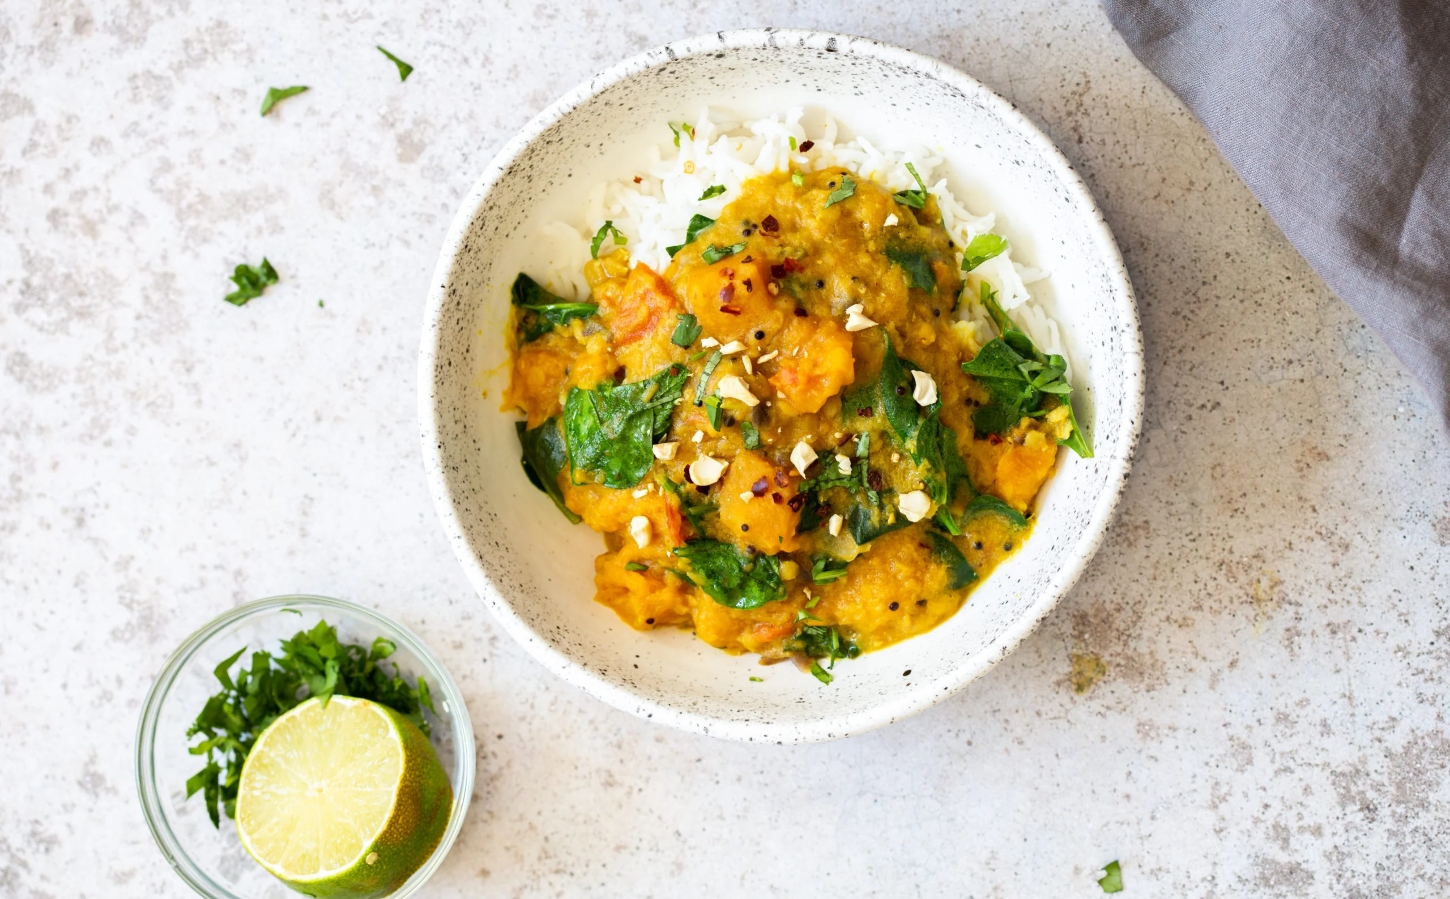 lentil and butternut squash curry with rice in a bowl